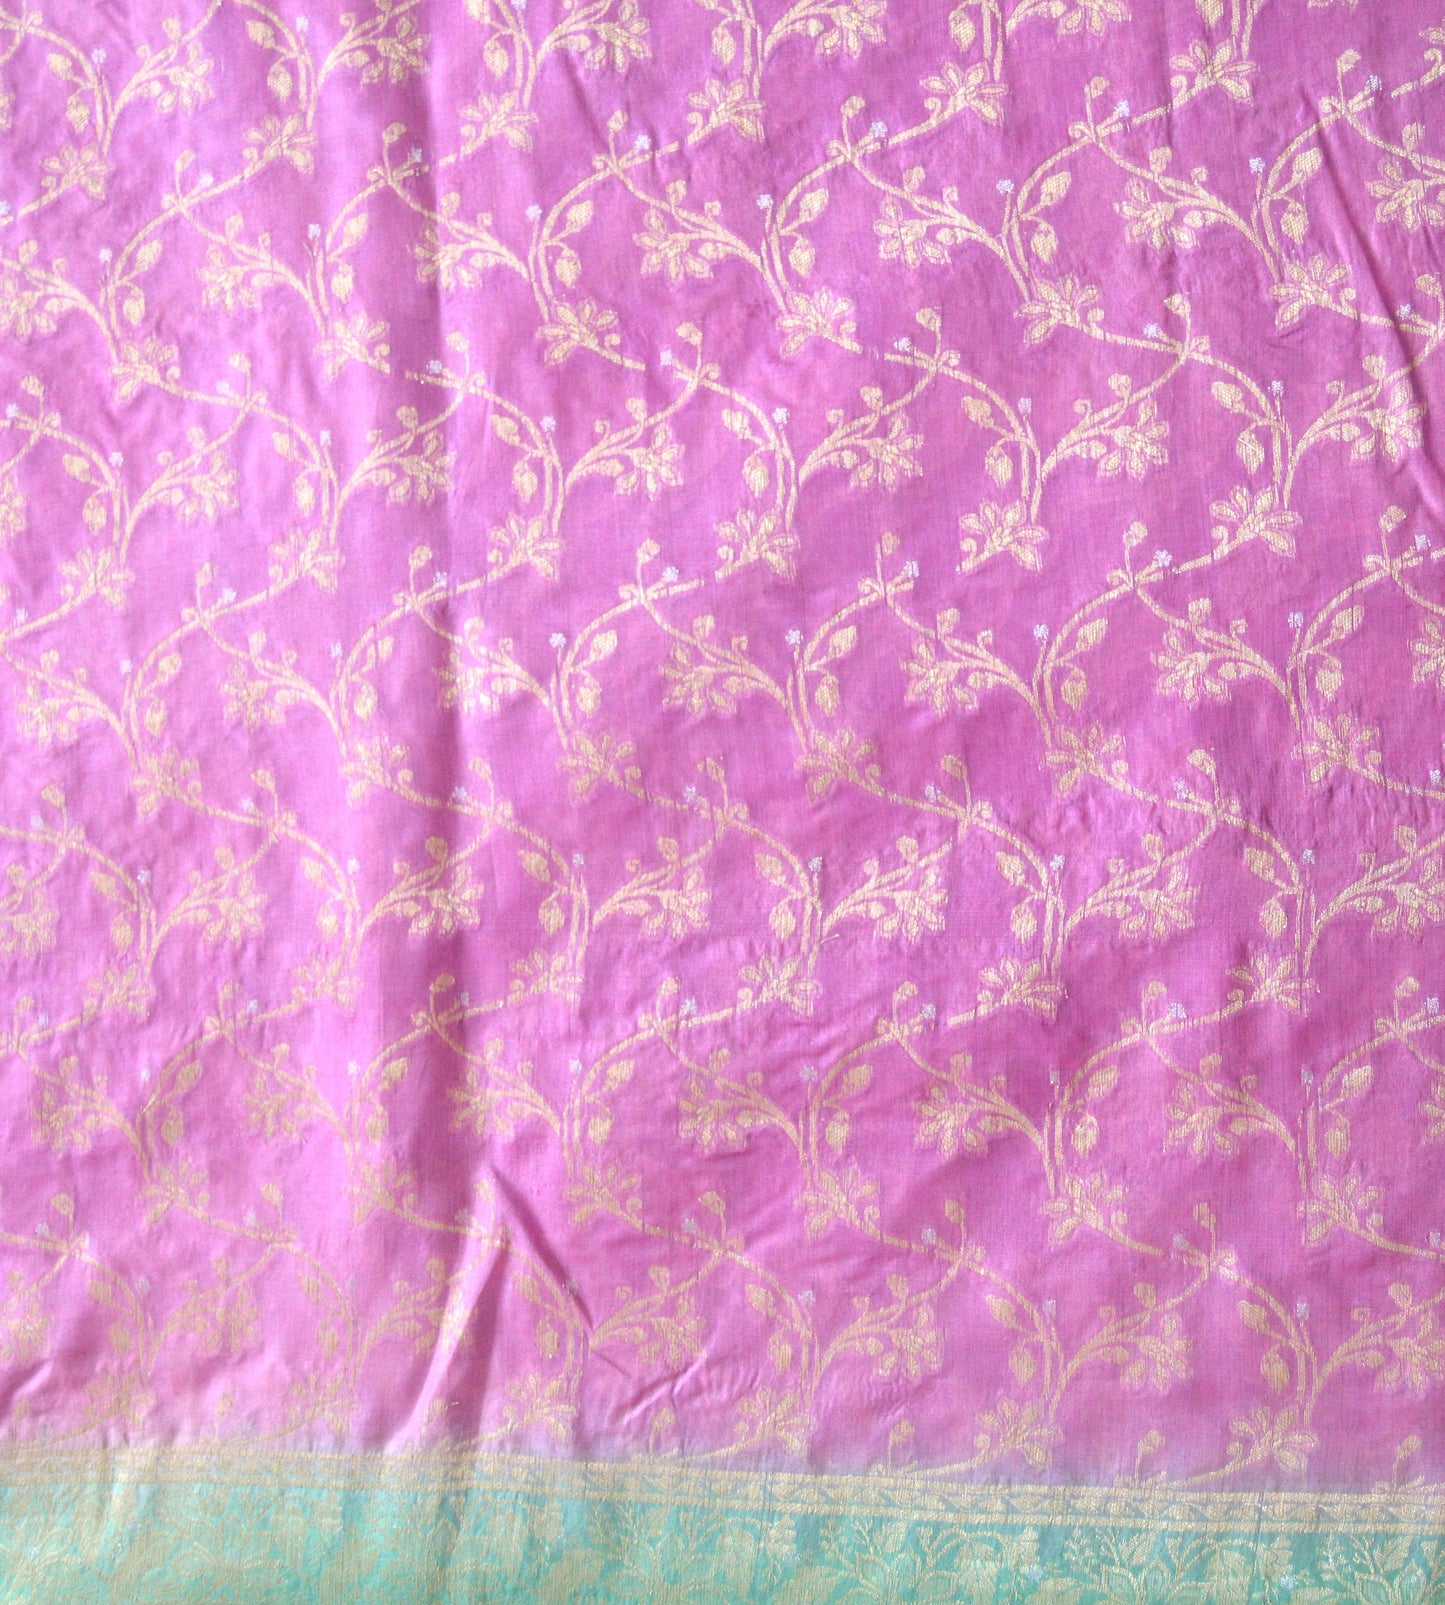 Silk Fabric, Vintage Recycled Sari Silk Fabric, Gift Wrapping, Collage, Mixed Media, Textile Art, Creative Art, Junk Journal, Sewing